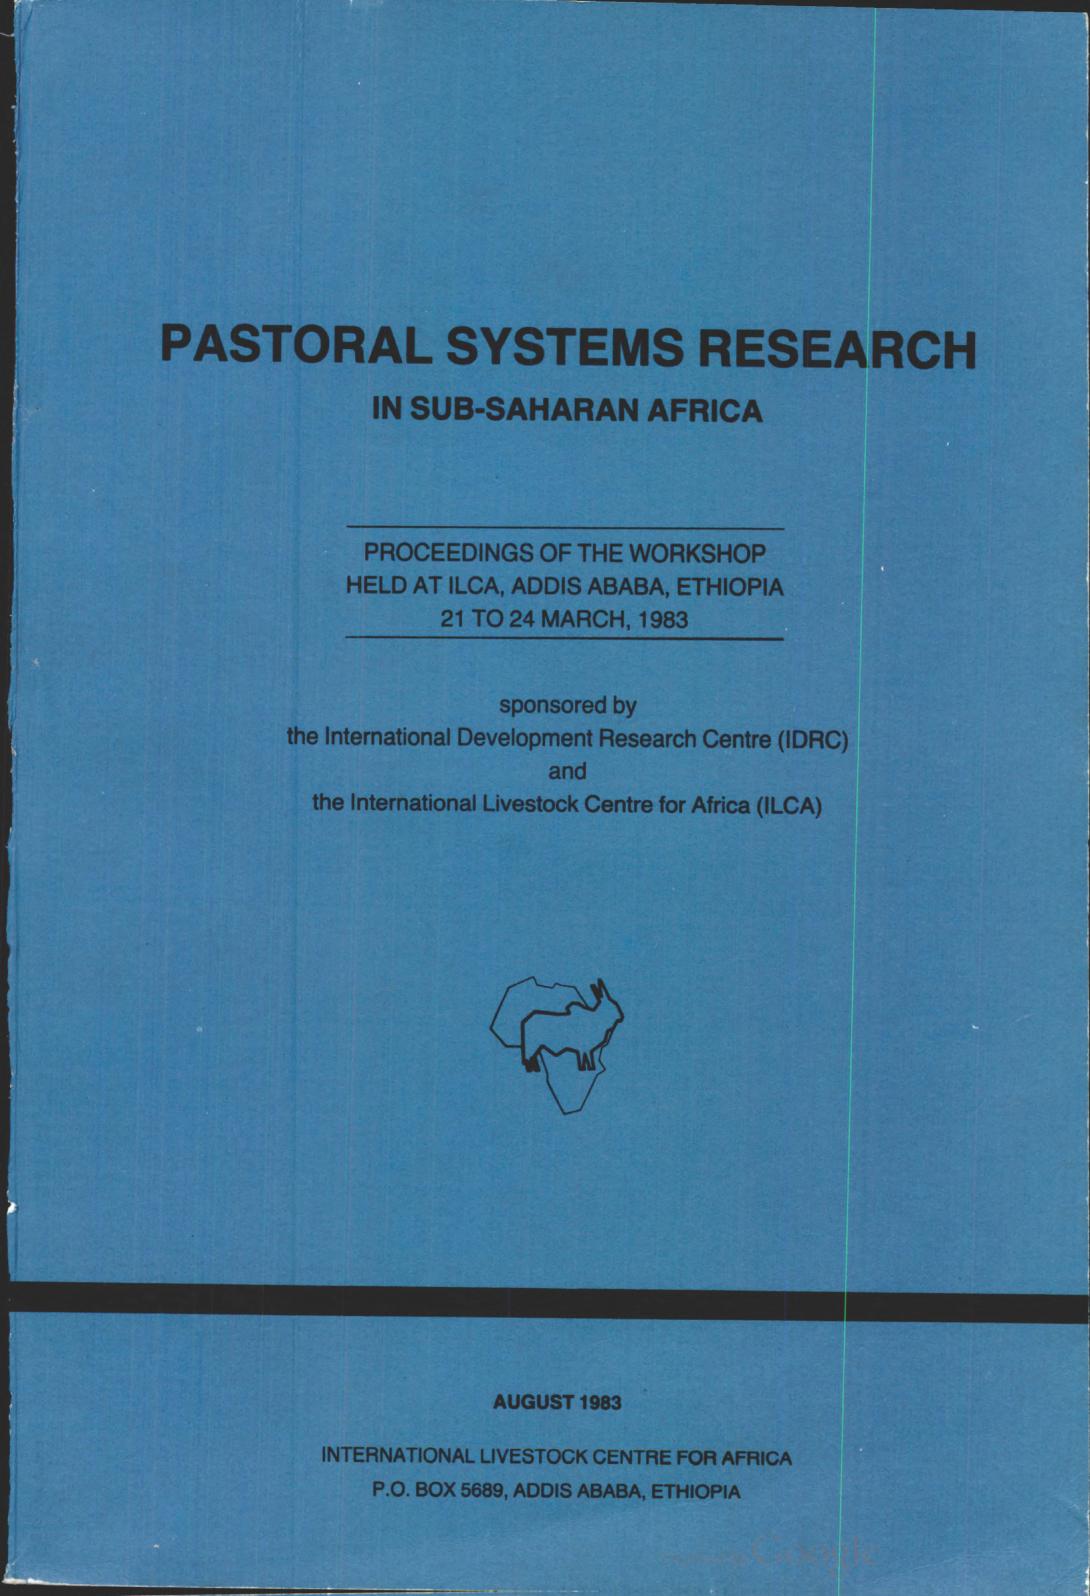 Design and testing procedures in livestock systems research: An agro-pastoral example